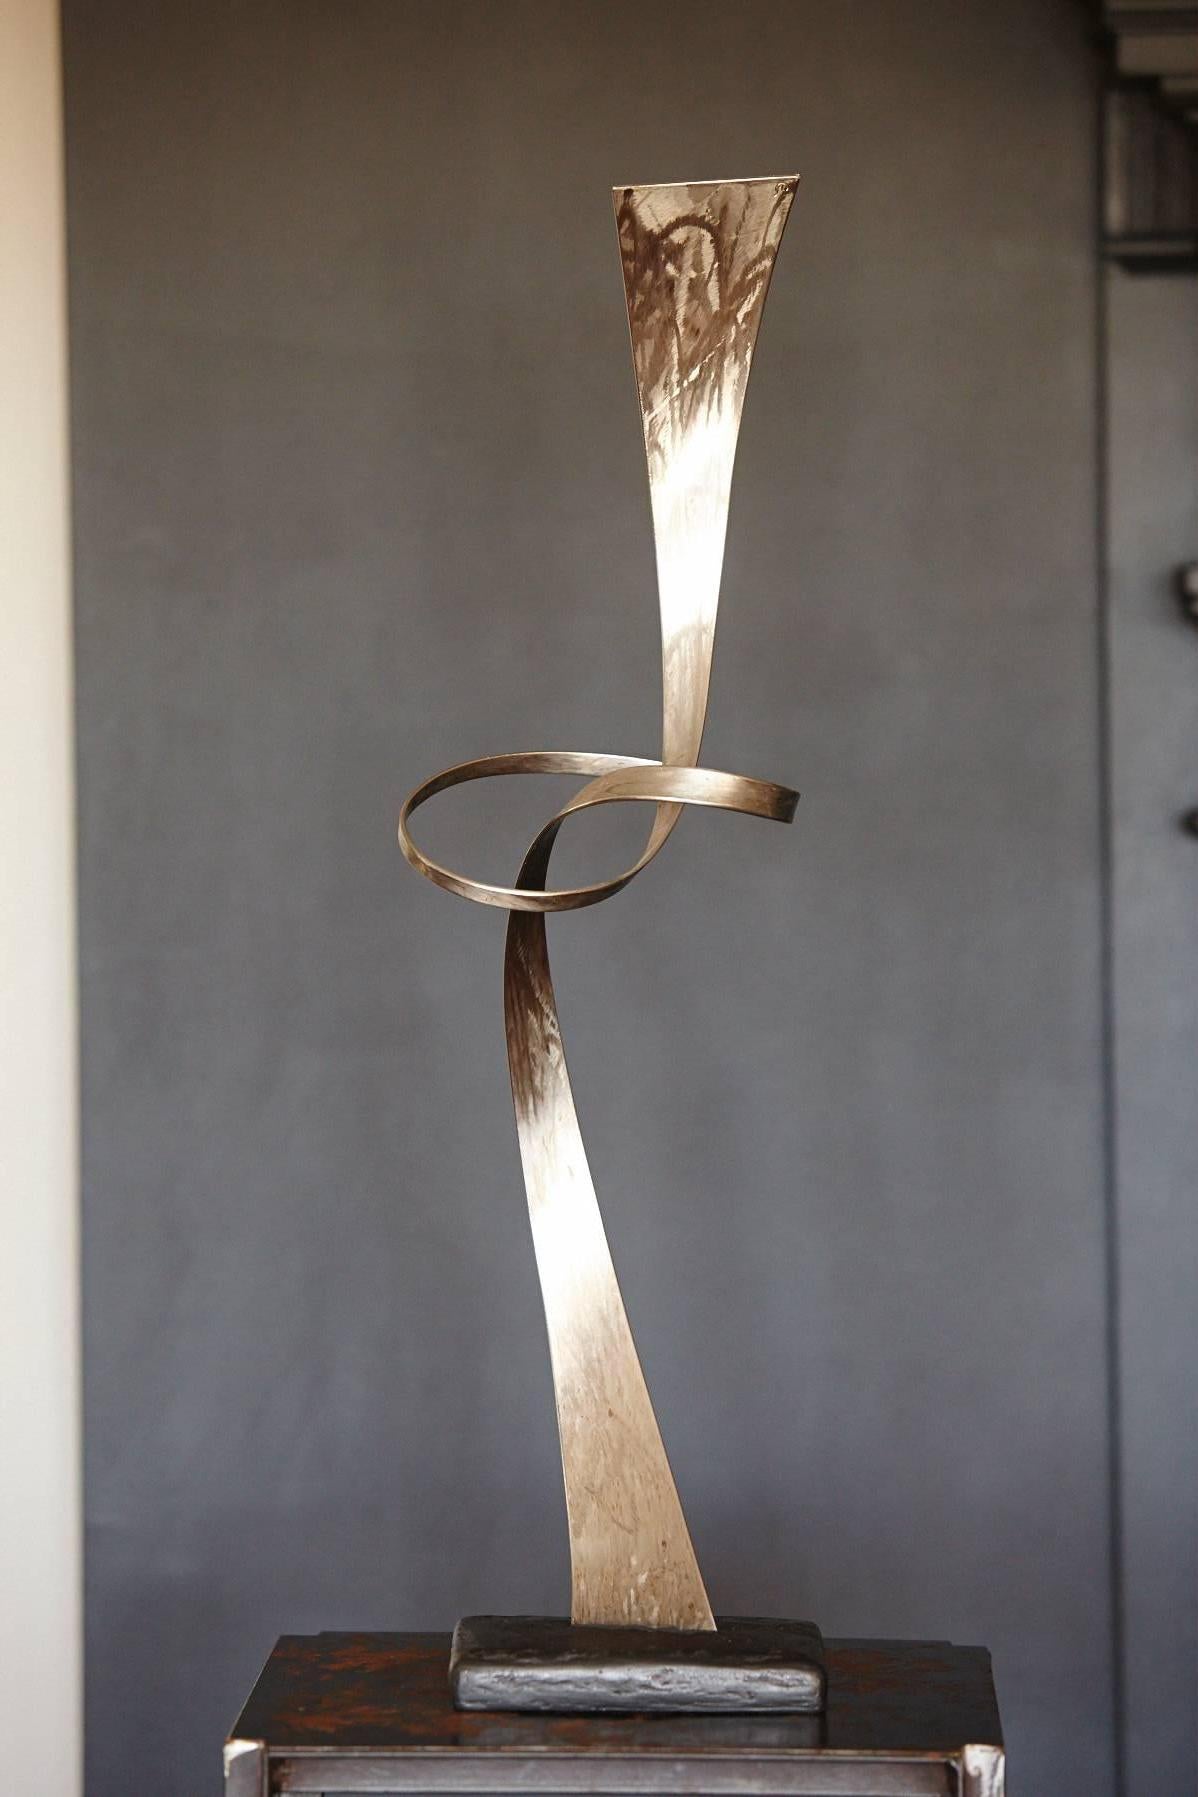 Beautiful airy steel sculpture showing a steel ribbon that tapers from wide to narrow to wide again with a joyful, light move in form of a knot in the middle.
The hand colored patina and the structures of the brushed metal give the sculpture an